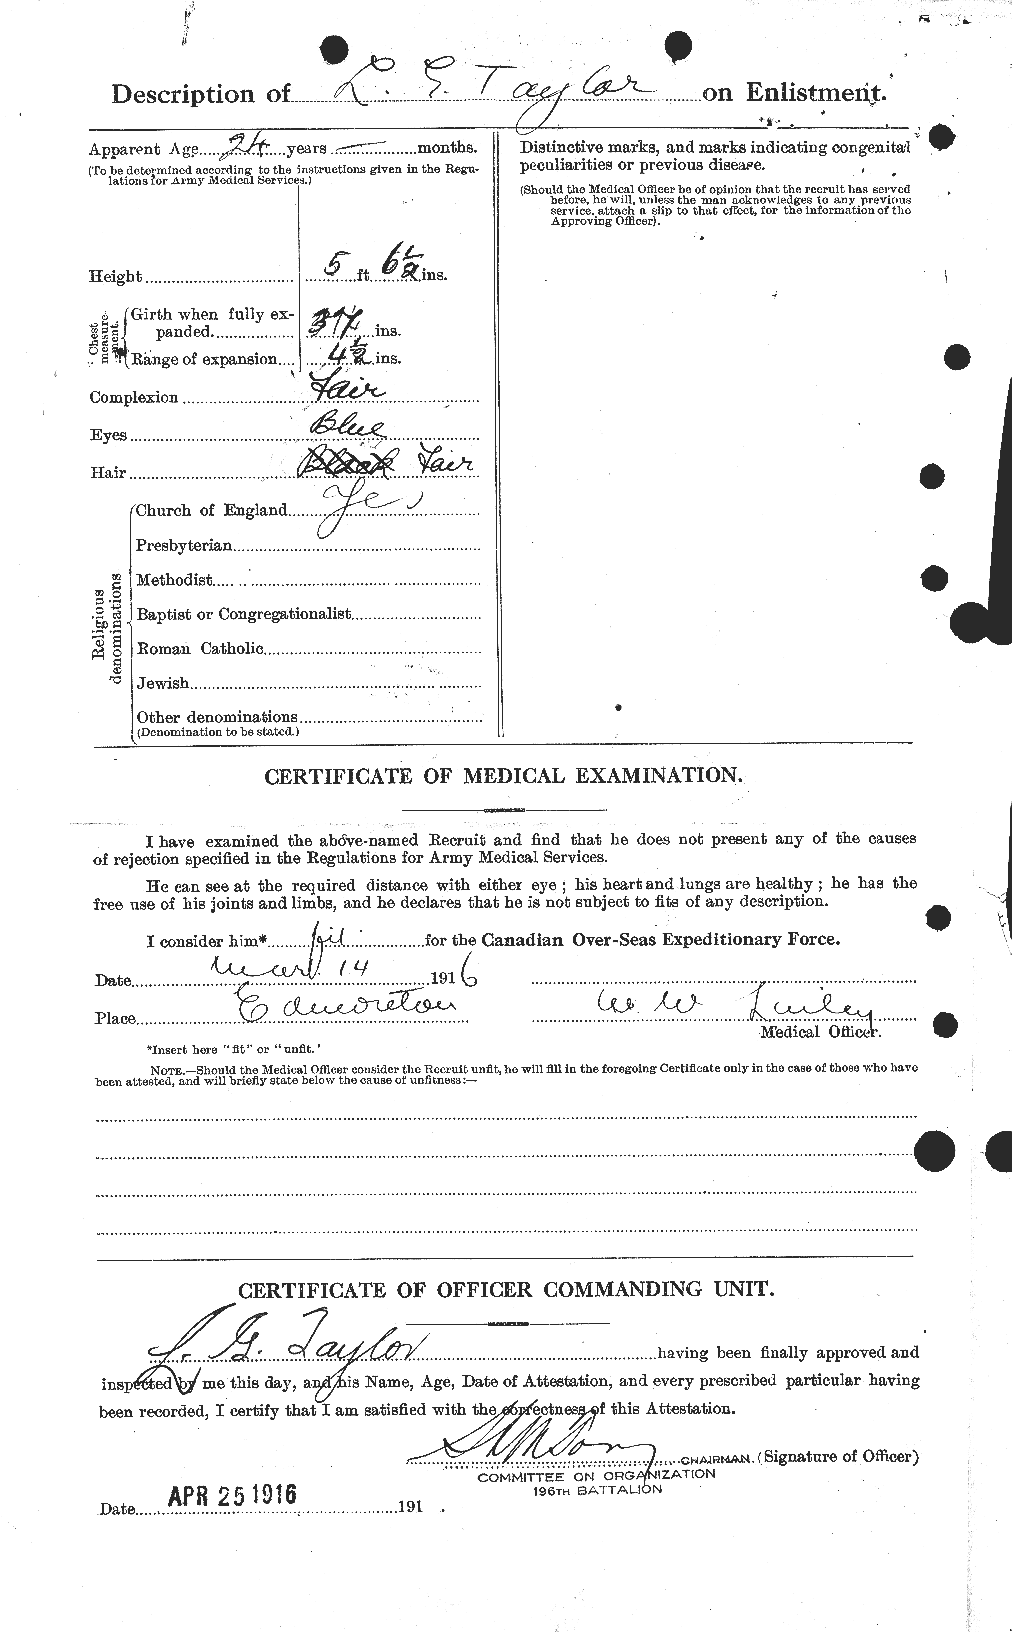 Personnel Records of the First World War - CEF 627639b